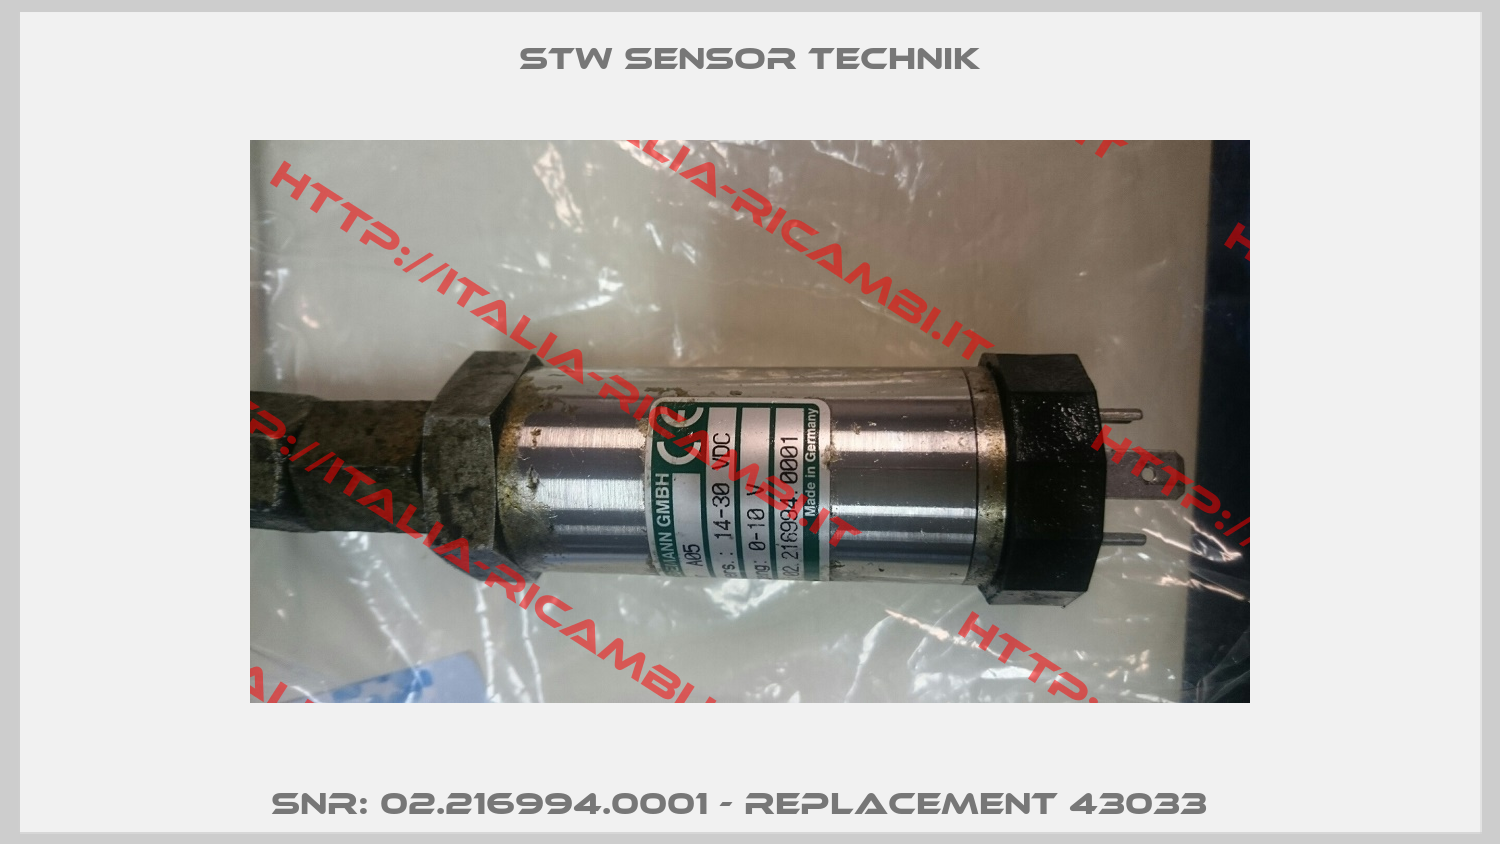 SNr: 02.216994.0001 - replacement 43033  -4